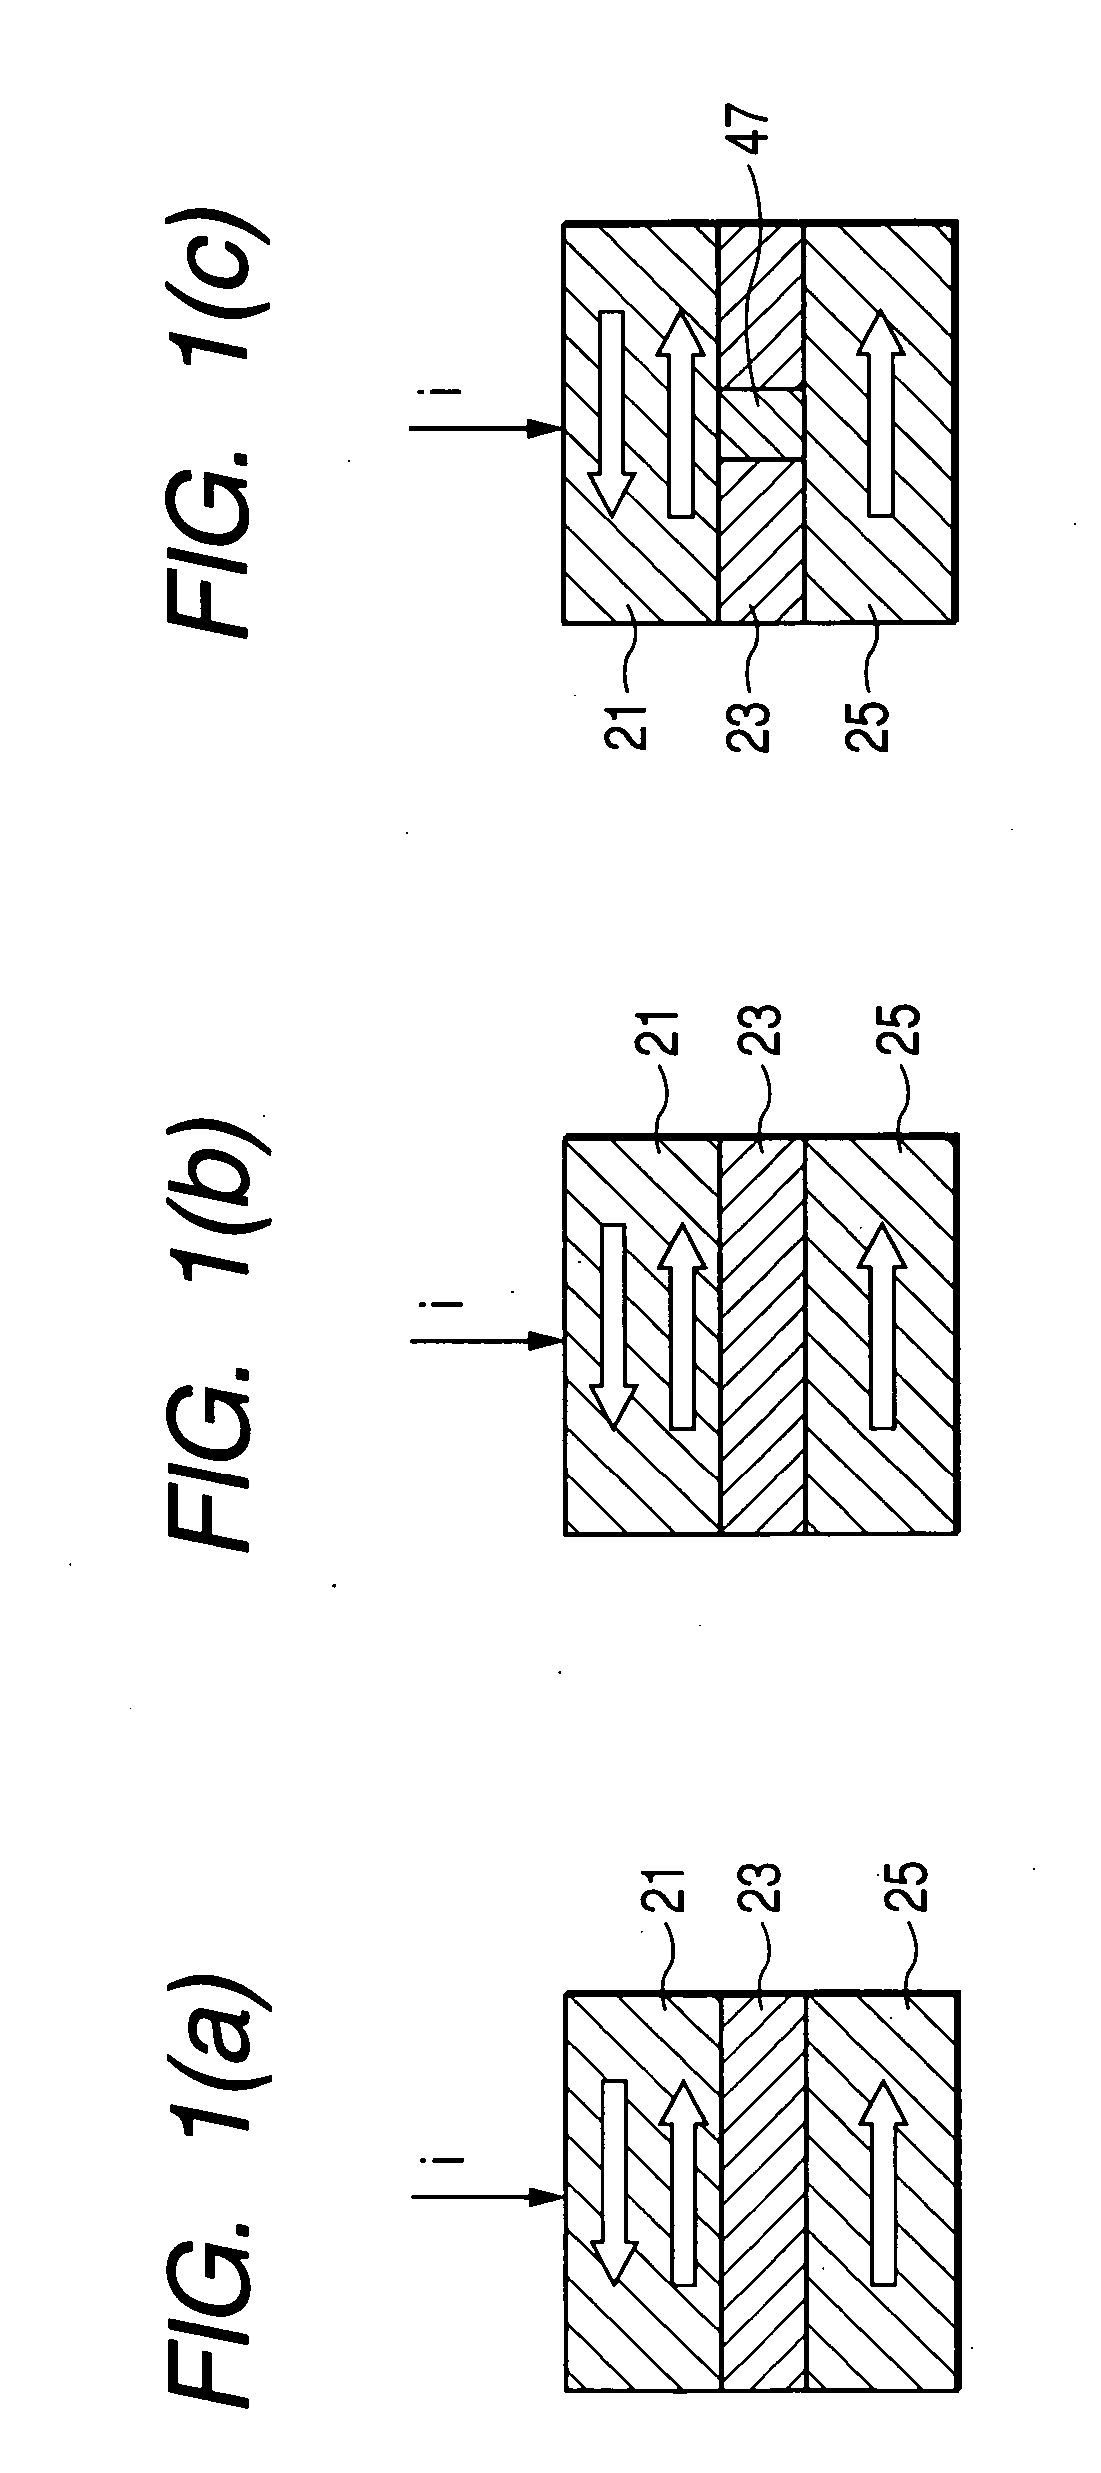 Exchange-coupled free layer with out-of-plane magnetization